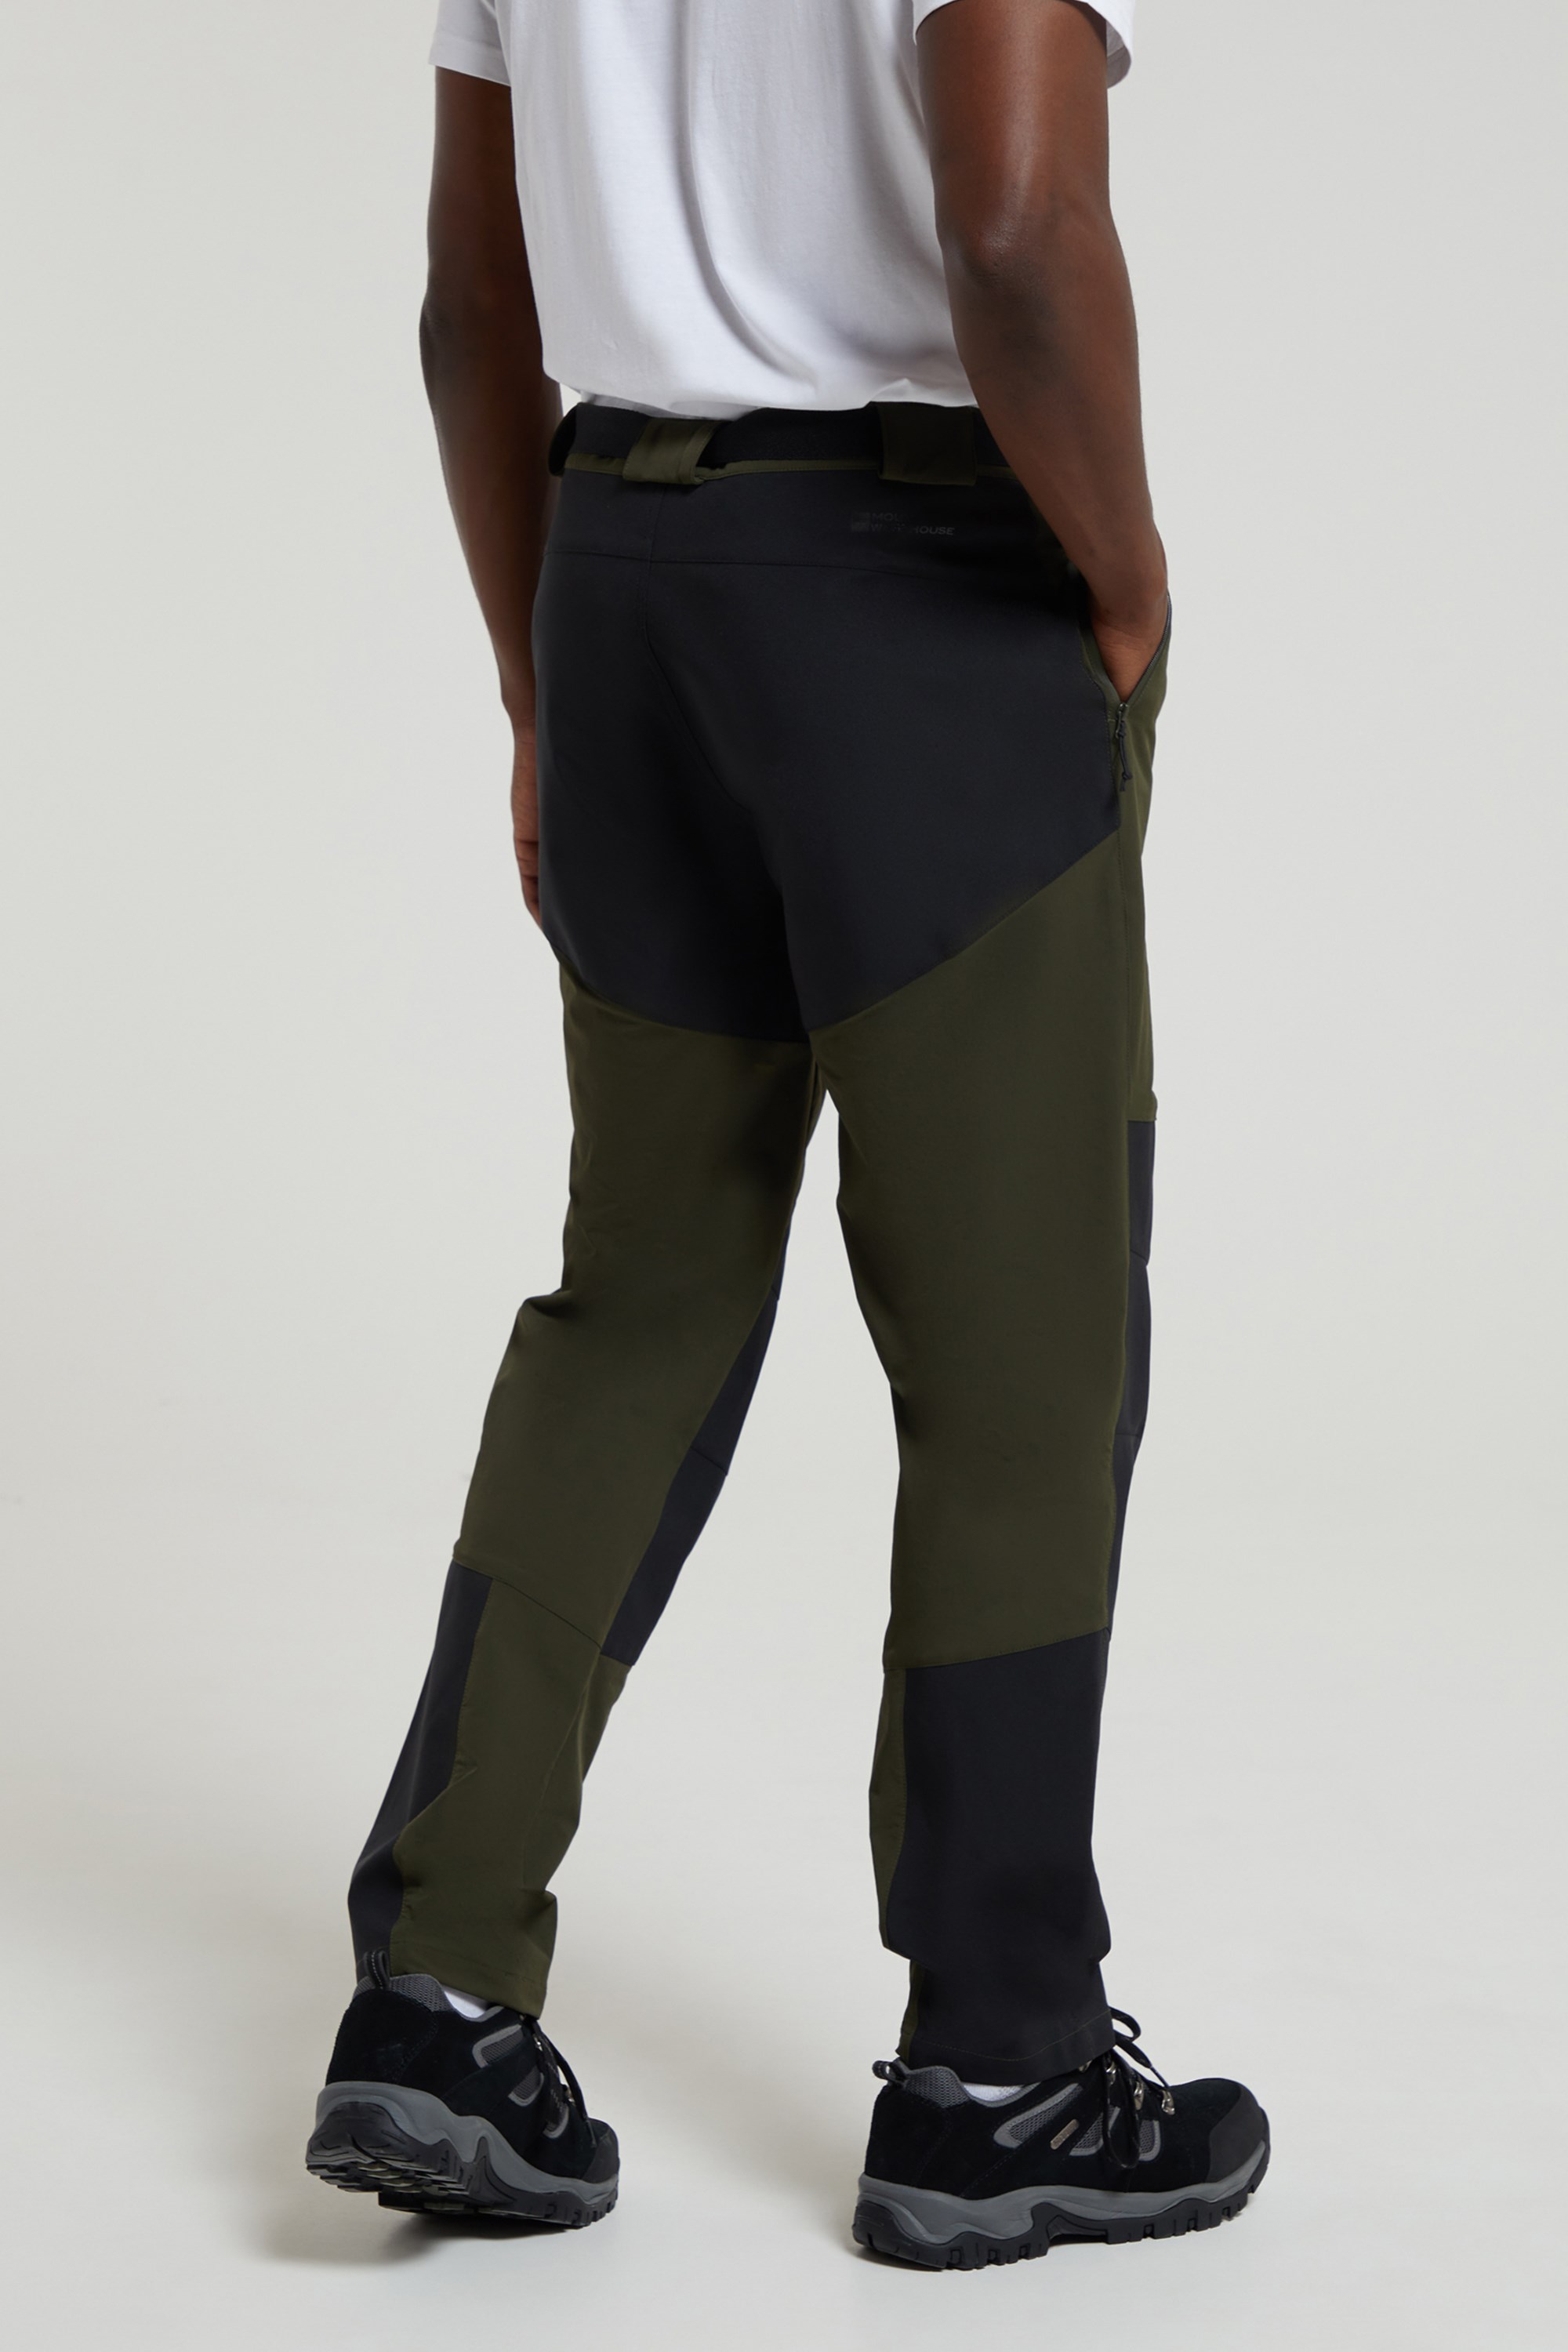 Adventure Water Resistant Womens Softshell Trousers | Mountain Warehouse GB